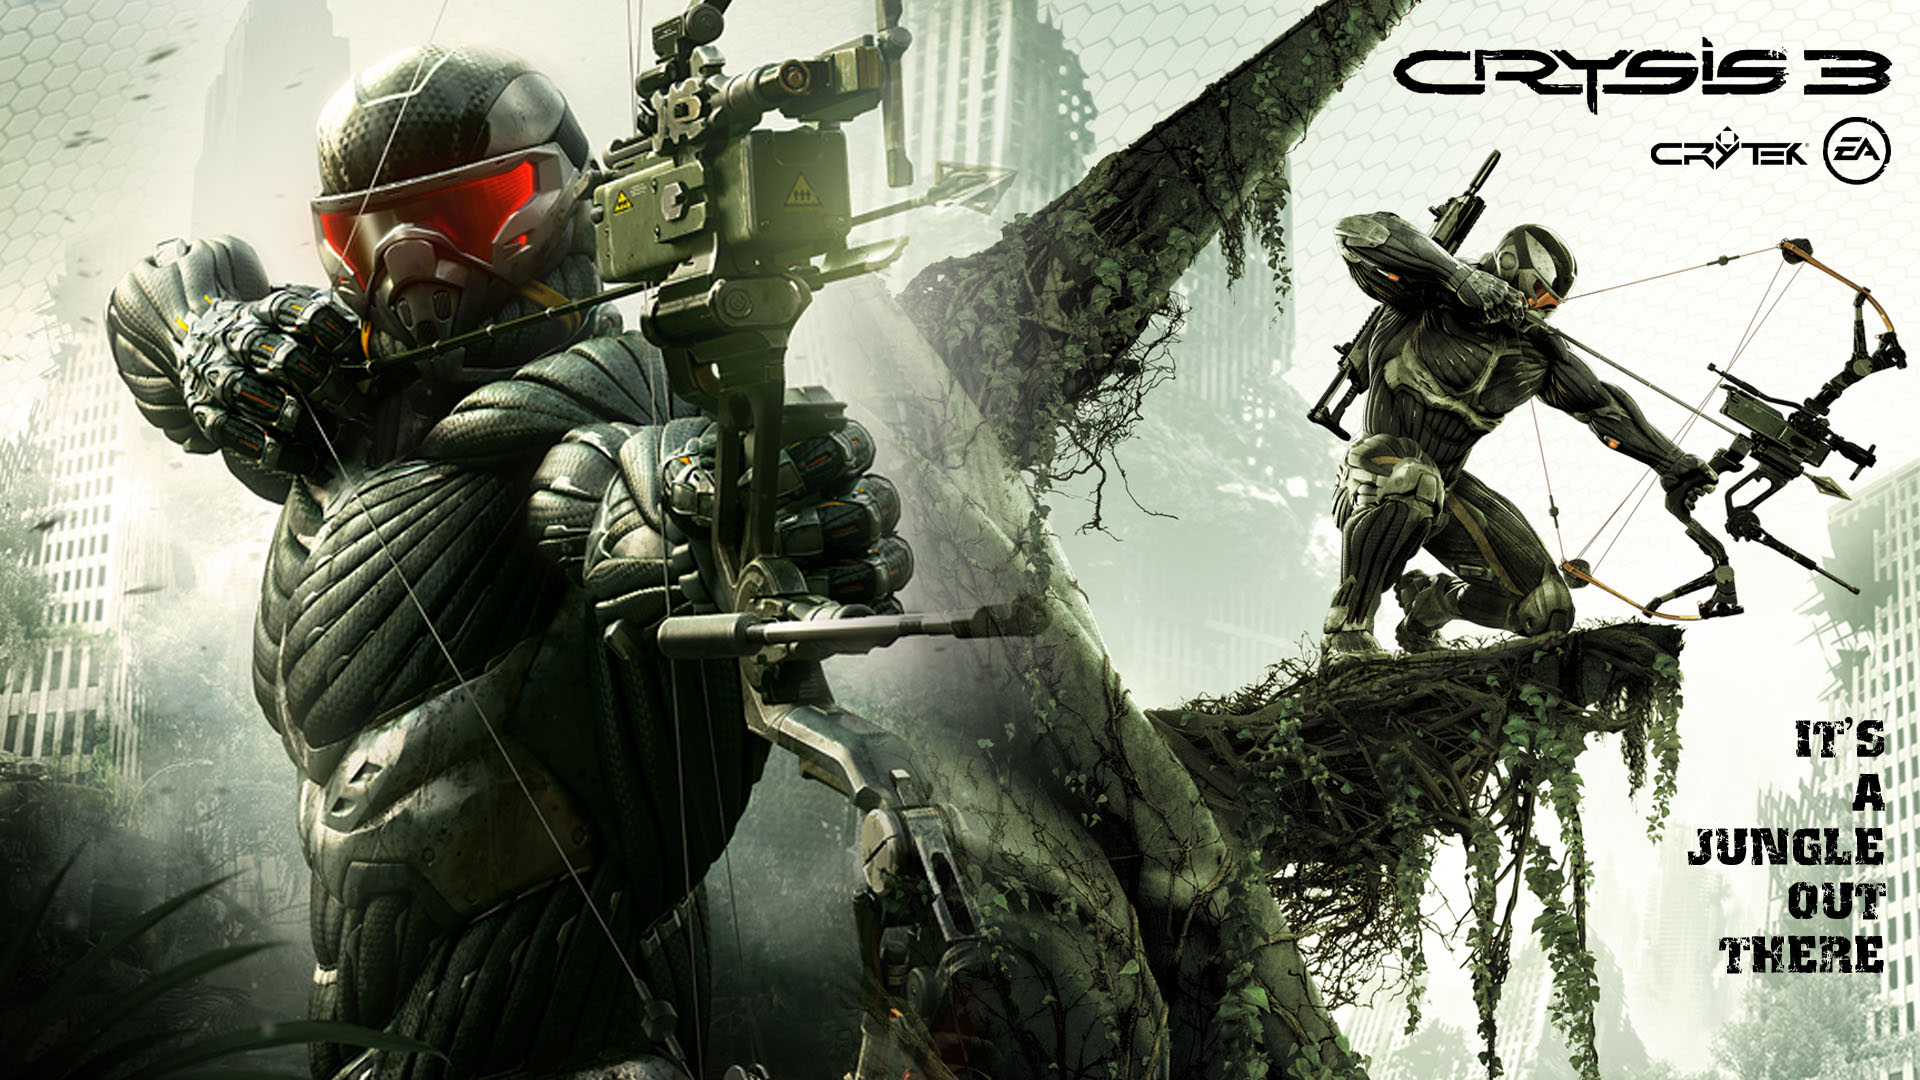 3hd wallpaper,action adventure game,pc game,shooter game,soldier,games